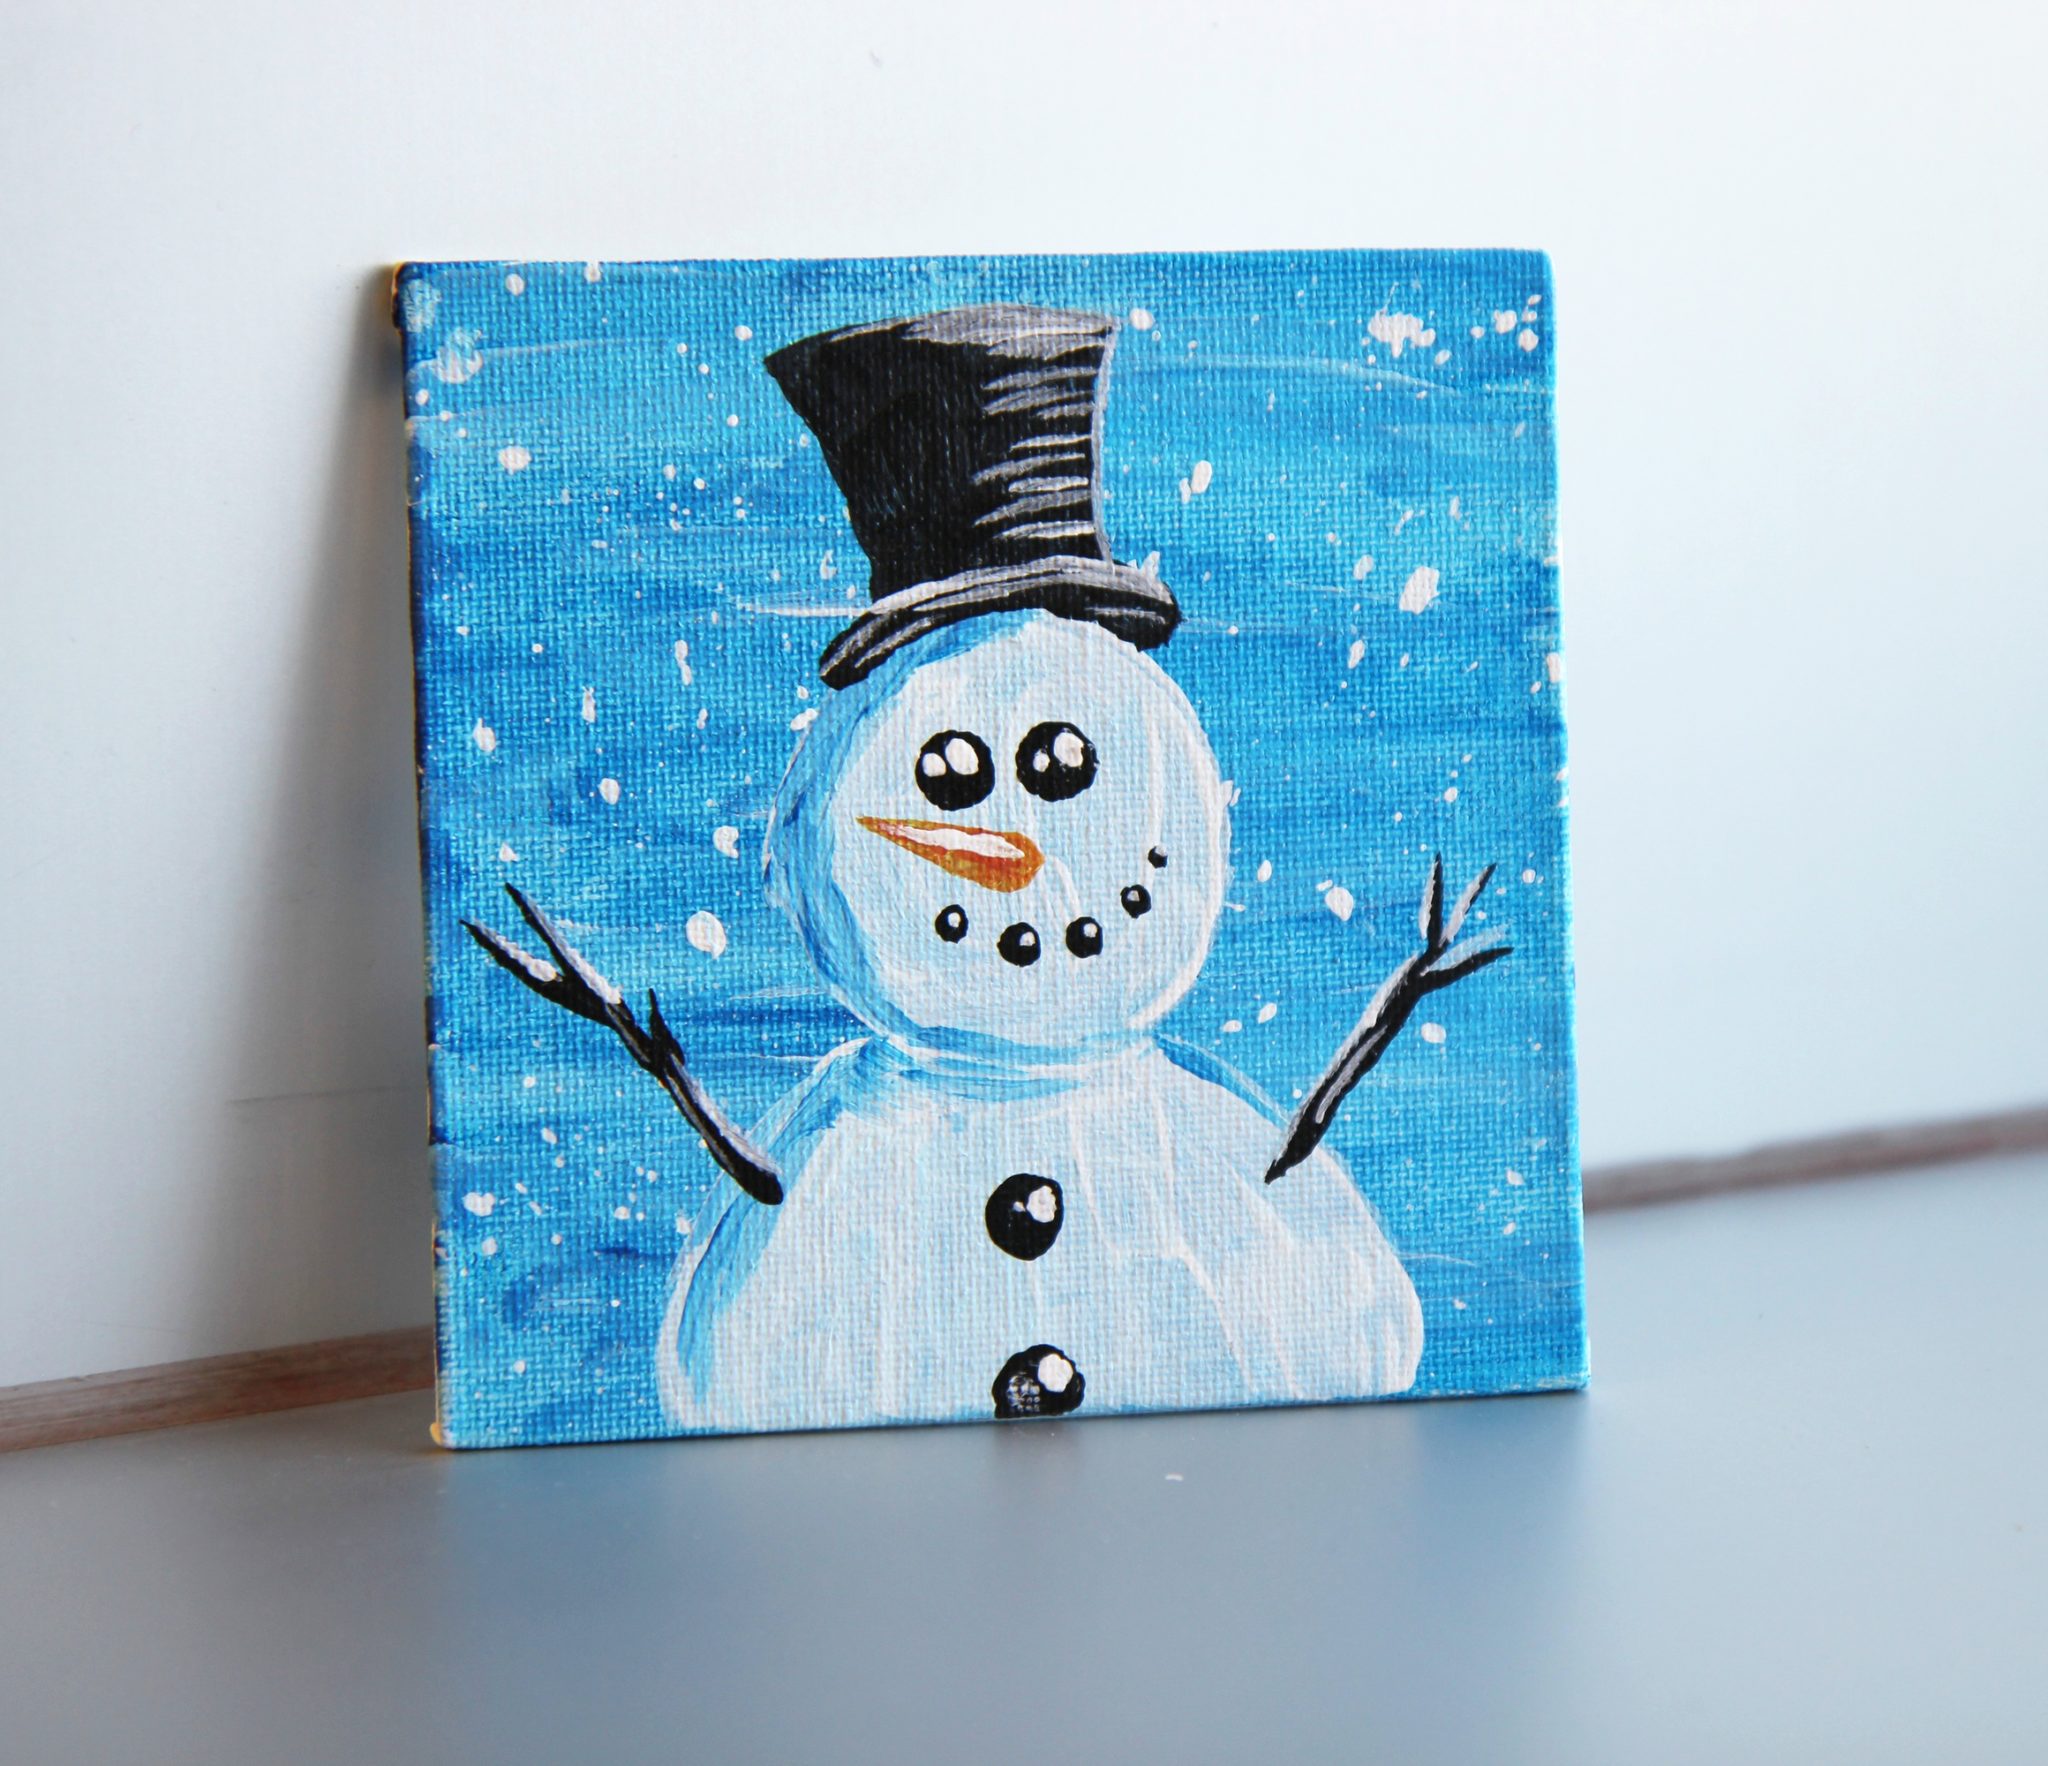 How to create a miniature snowman - Hobbies and Crafts